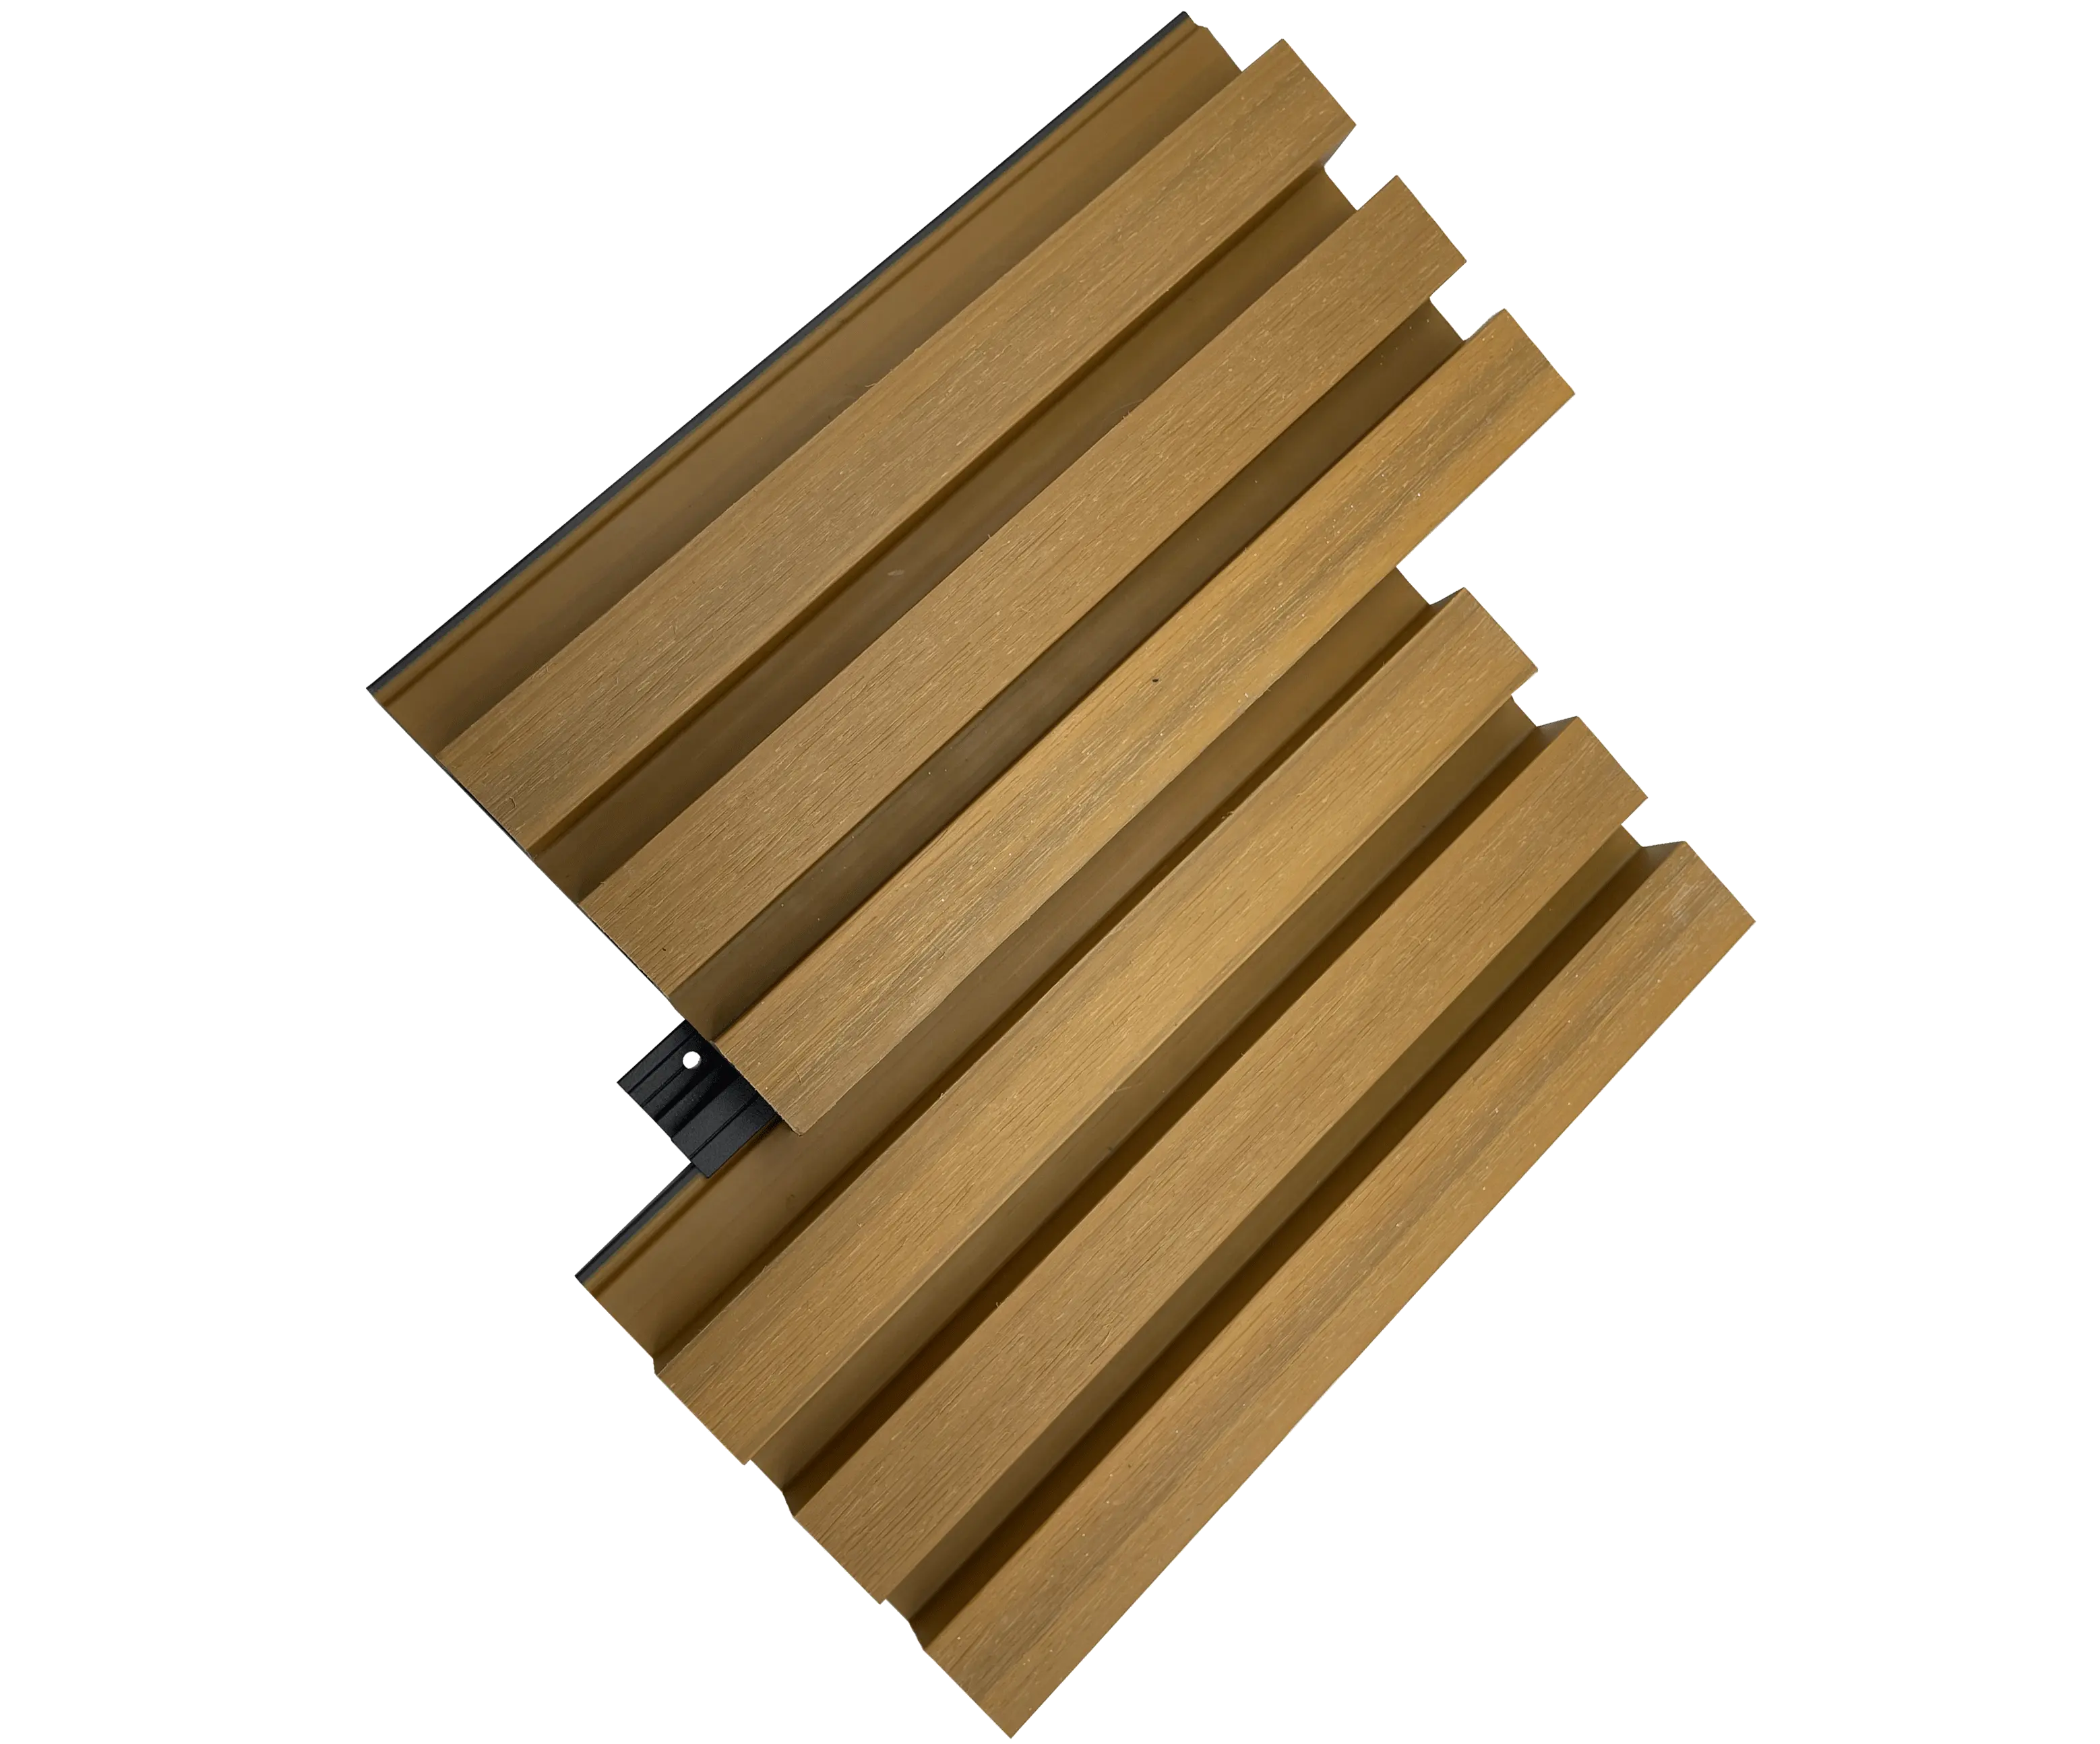 Teak Wood plastic composite panel for decoration exterior/interior ceiling wall panel wpc wall panel